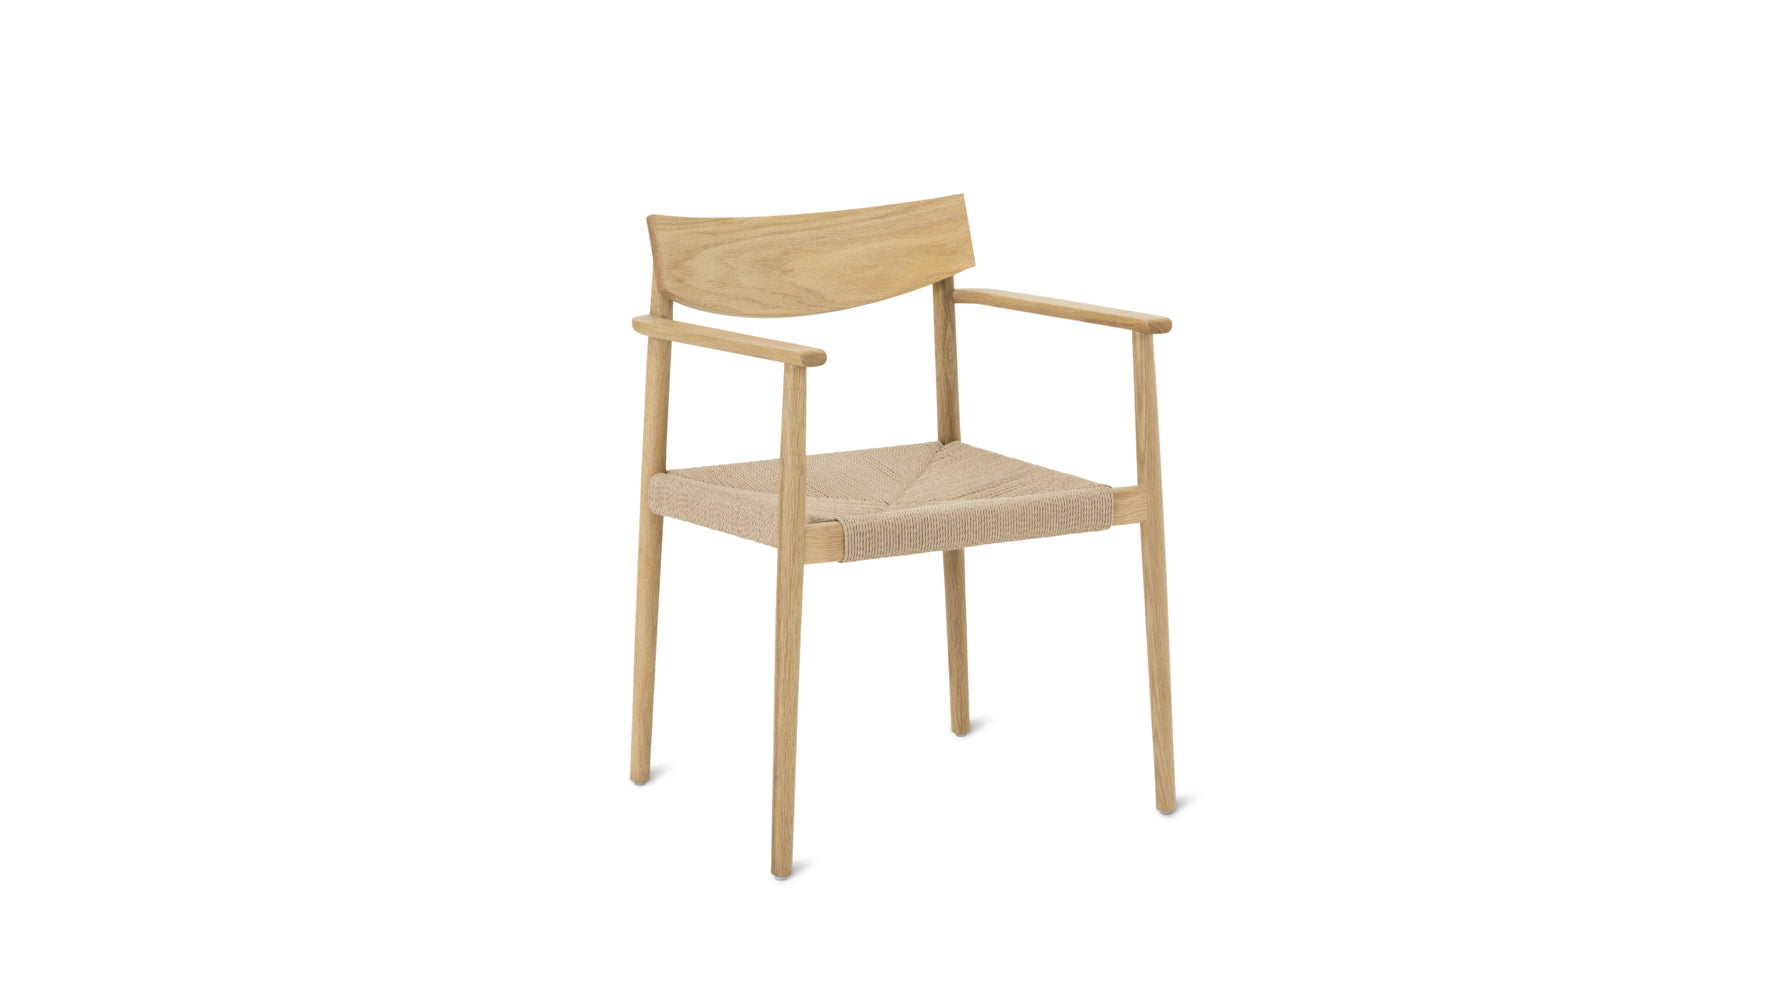 Dinner Guest Dining Chair, White Oak/ Natural Papercord Seat - Image 1